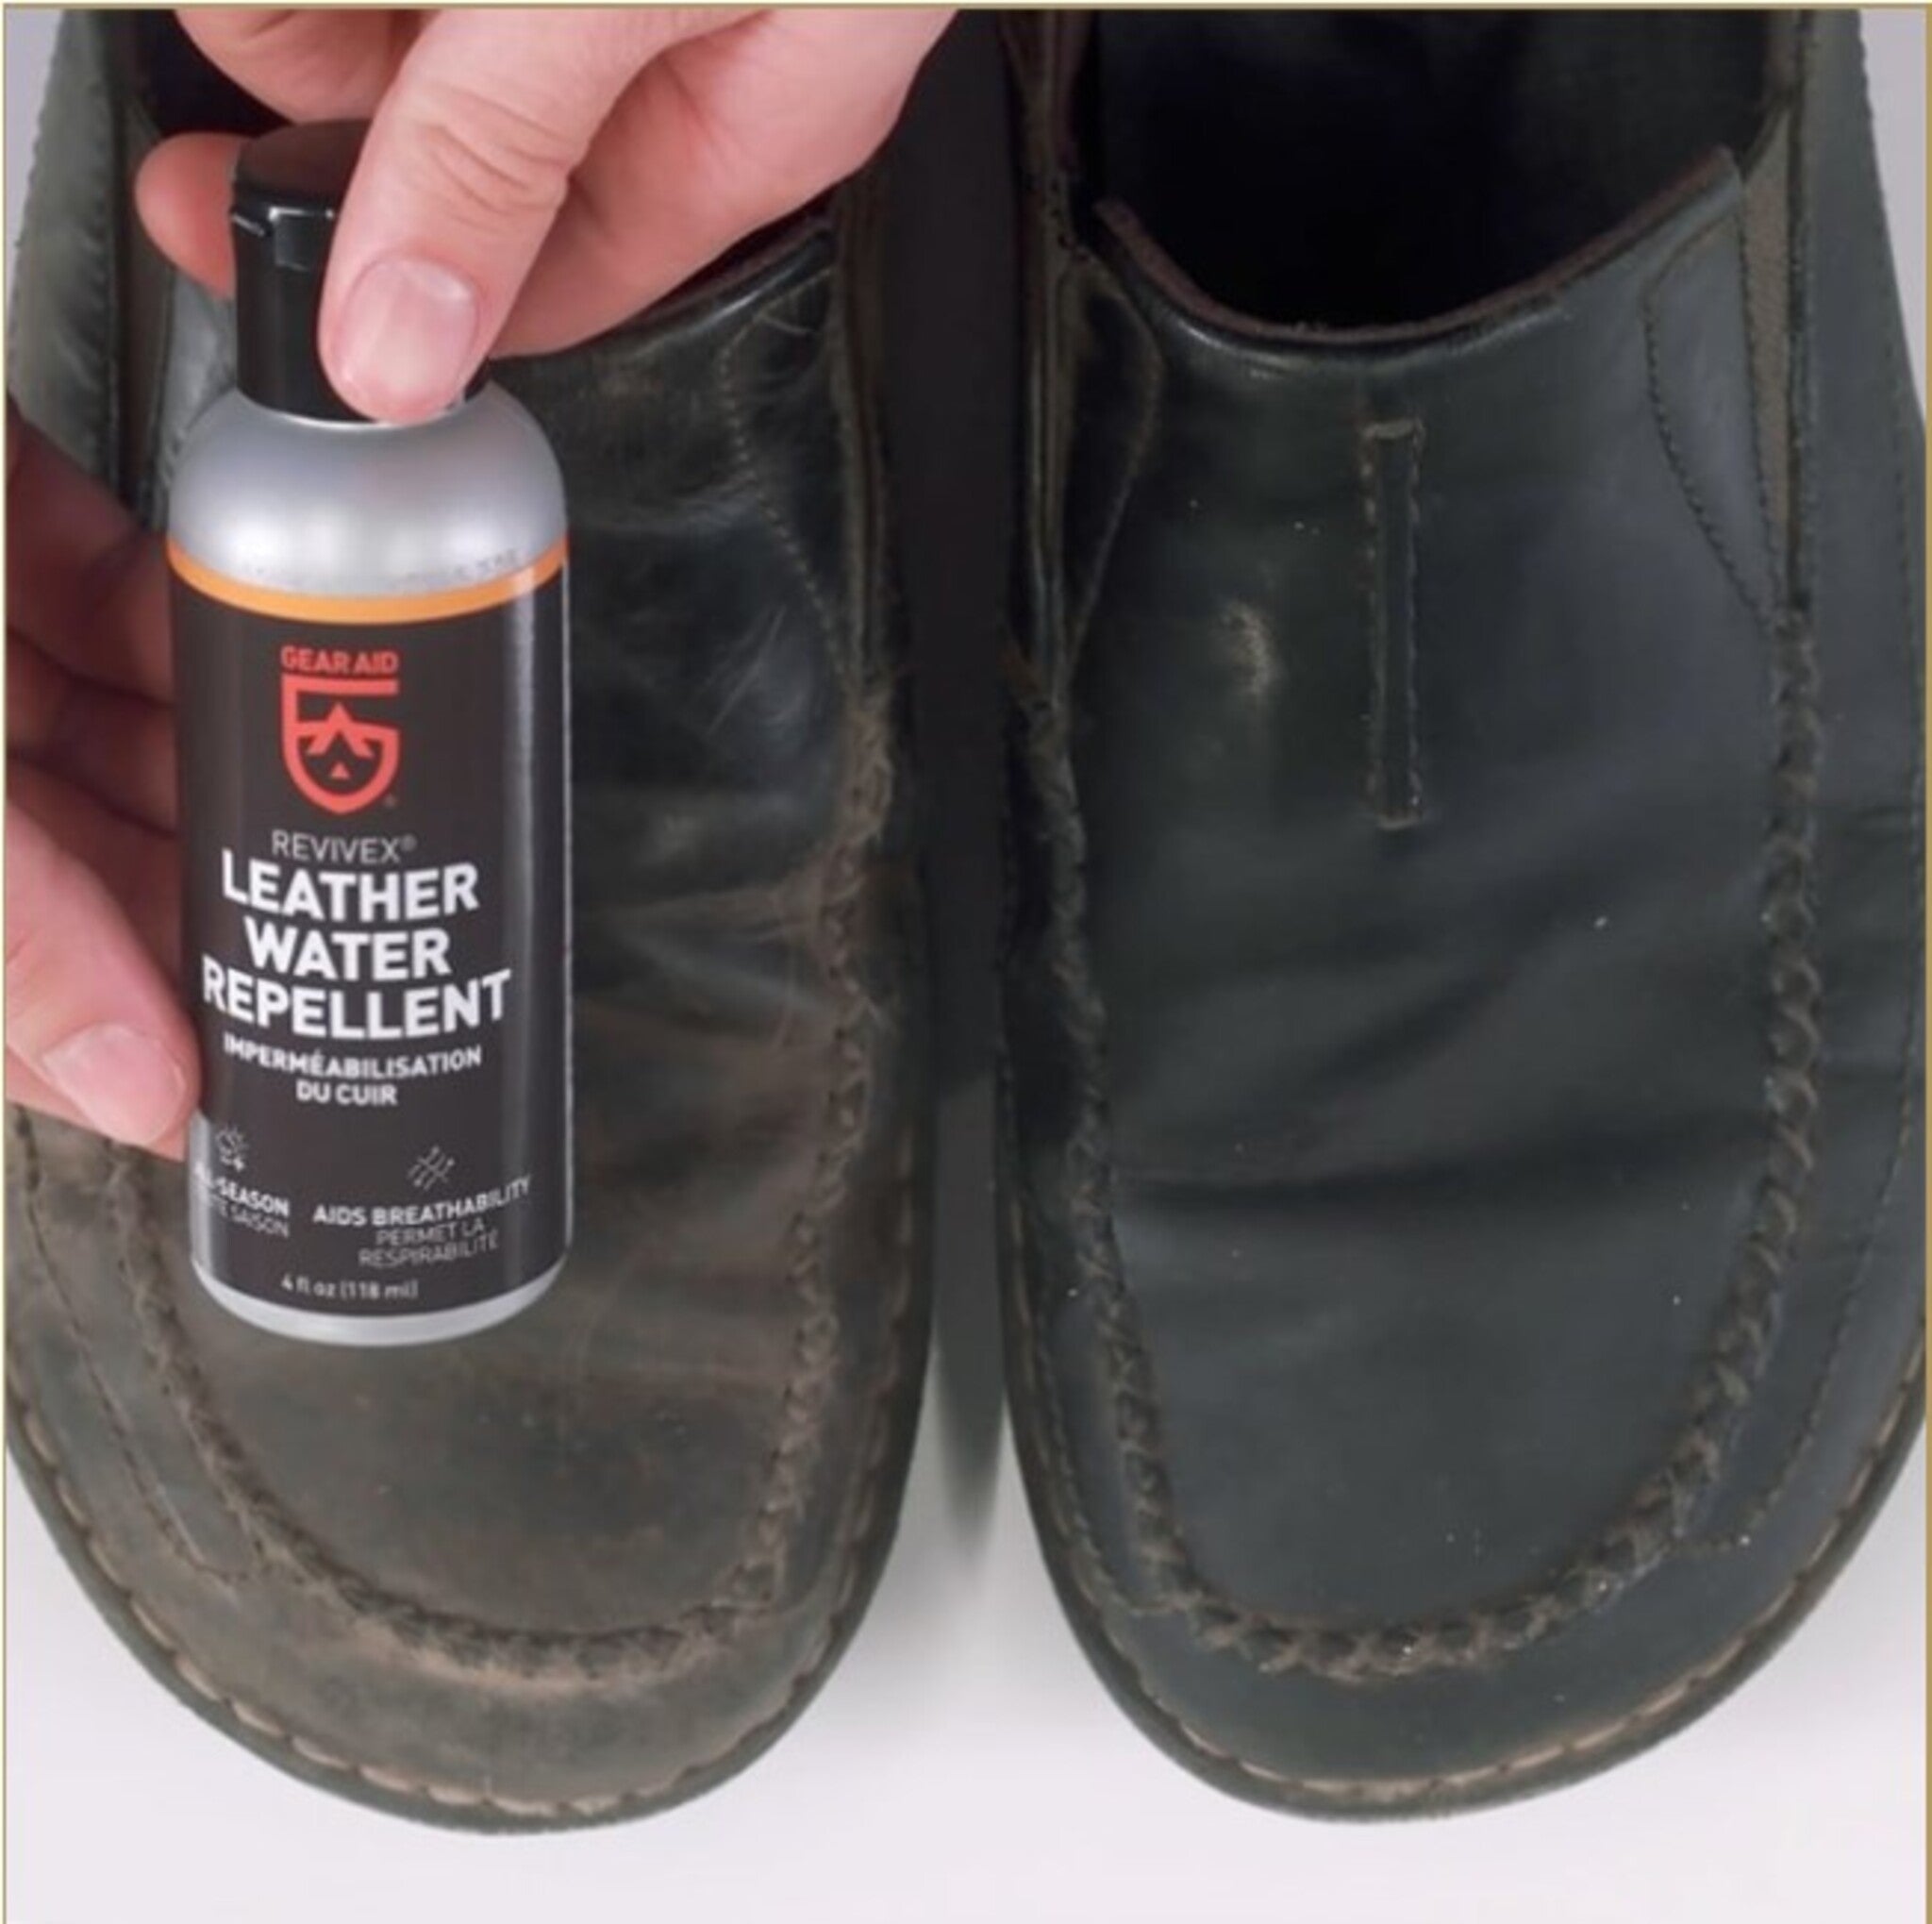 GEAR AID Revivex Leather Water Repellent 皮革防水塗劑 36260